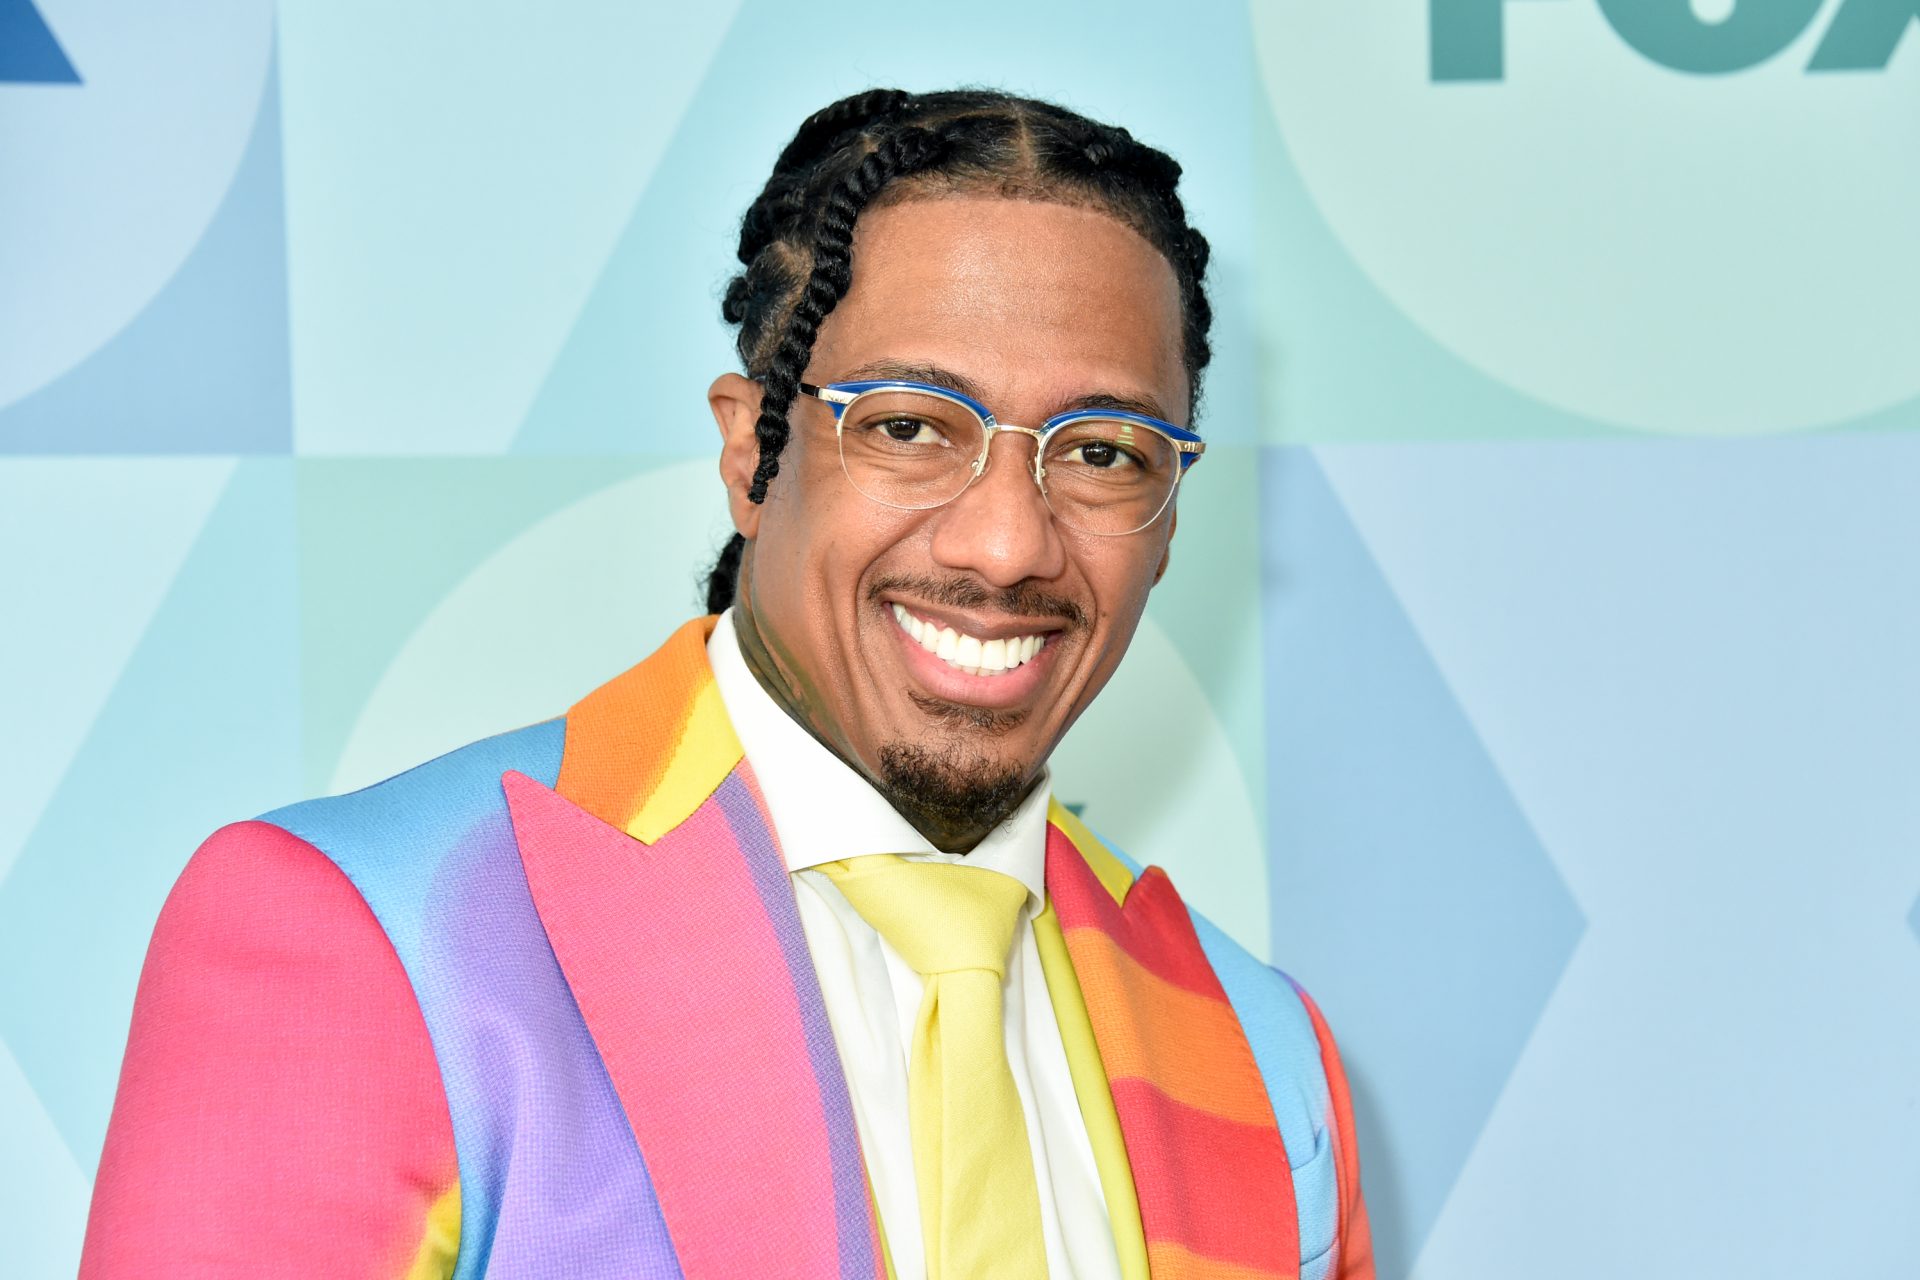 Nick Cannon insured his reproductive system